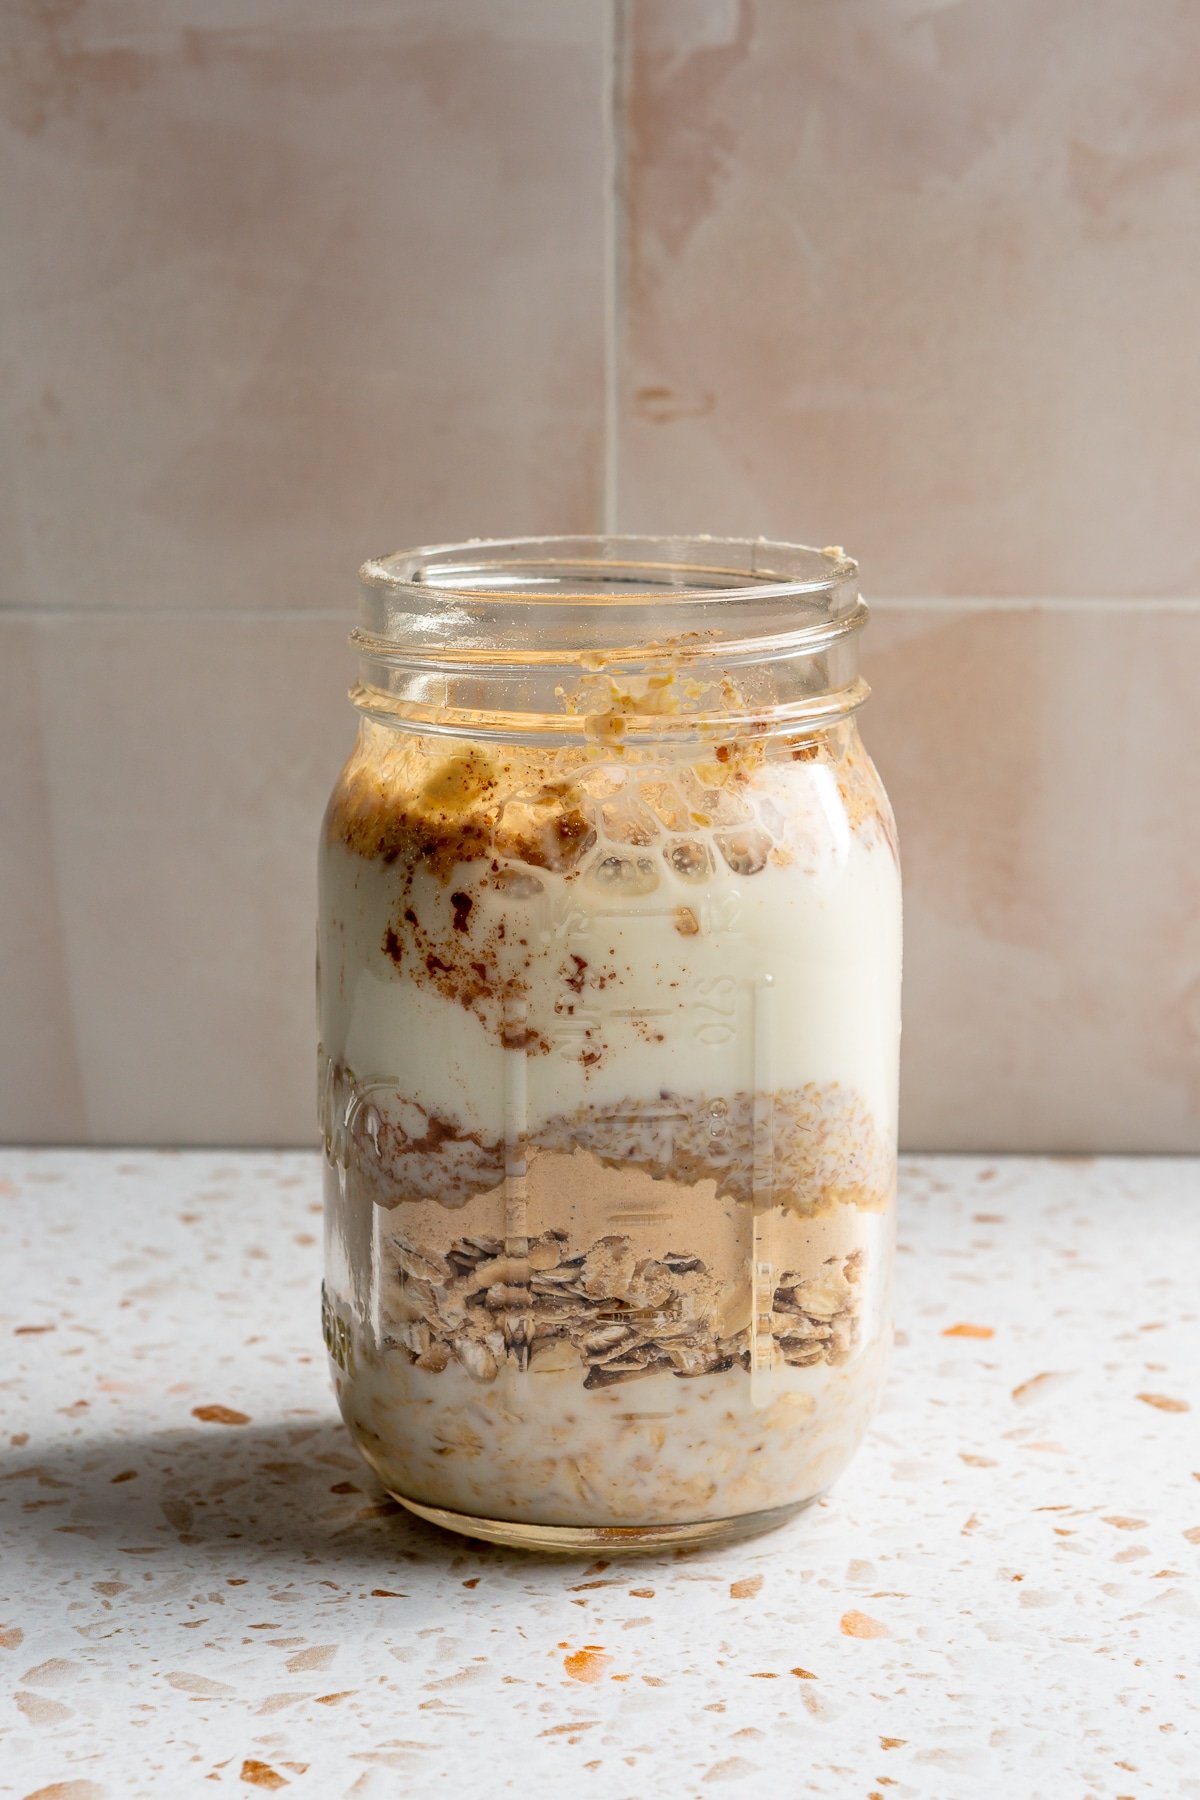 Ingredients for high protein overnight oats have been added to a mason jar.